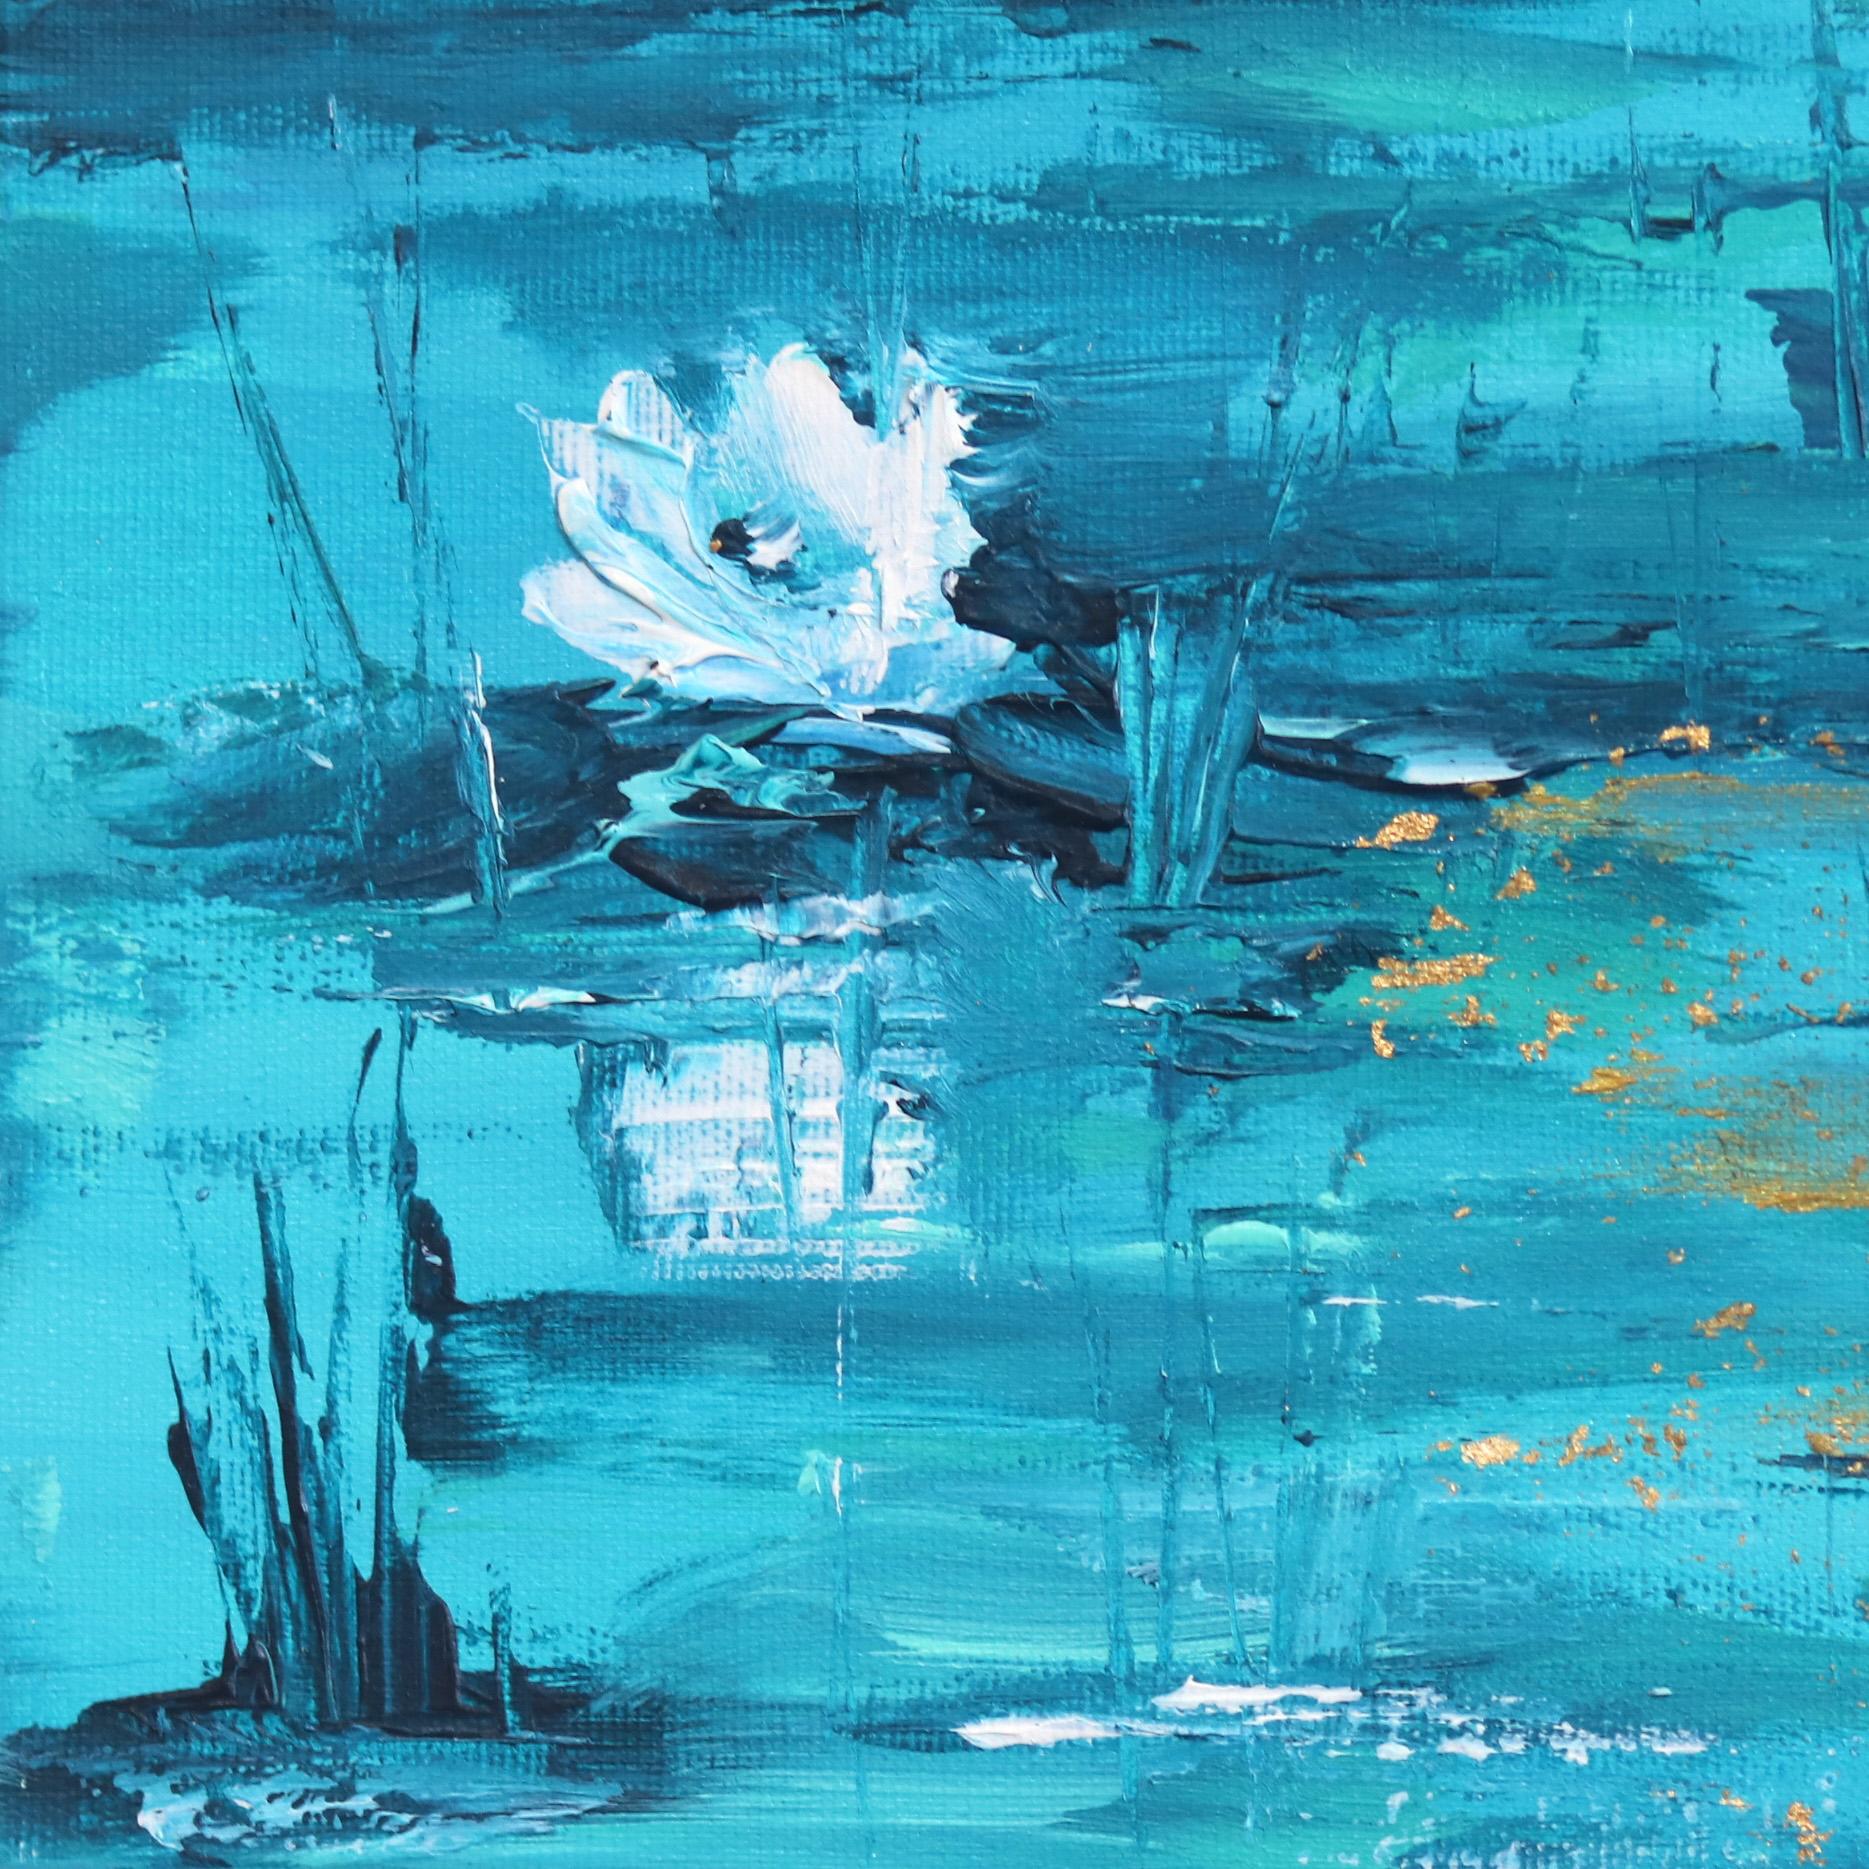 Ivana Milosevic creates vibrant, yet soothing water landscapes that emphasize color and texture. She uses palette knives and brushes to carve details into layers of paint. Water lilies populate the surface of her ponds, adding a sense of familiarity